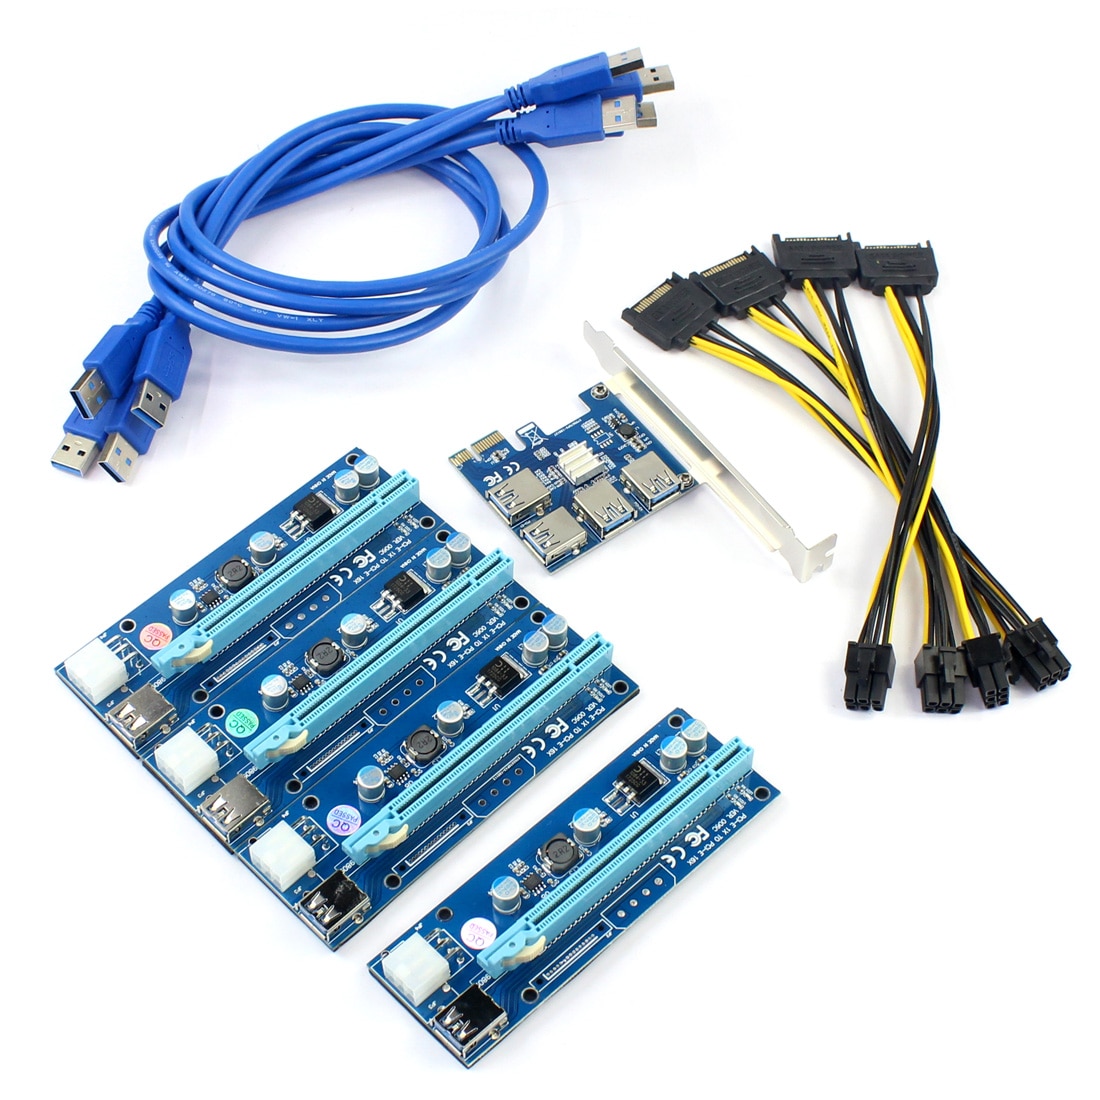 USB 3.0 PCI-E Express 1x to 16x Extender Riser Card Adapter Pcie 1 to 4 USB Convertor Graphics Video card for Miner BTC Litcoin